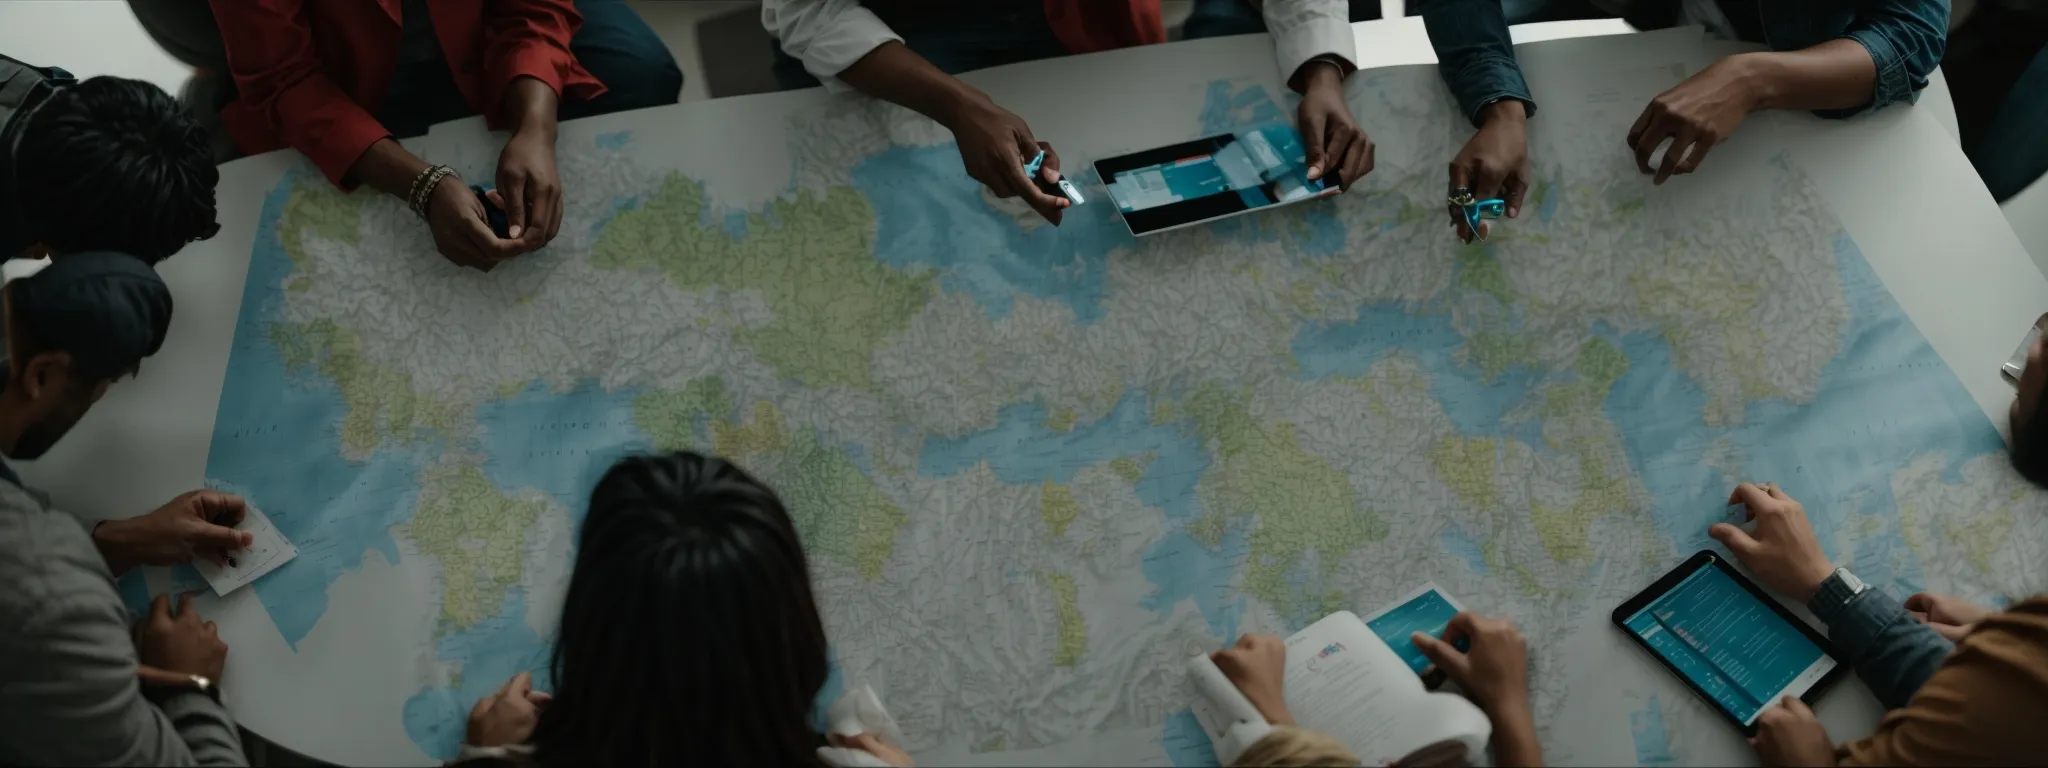 a diverse group of people sitting around a conference table with digital devices, actively discussing over a map spread out in the center.